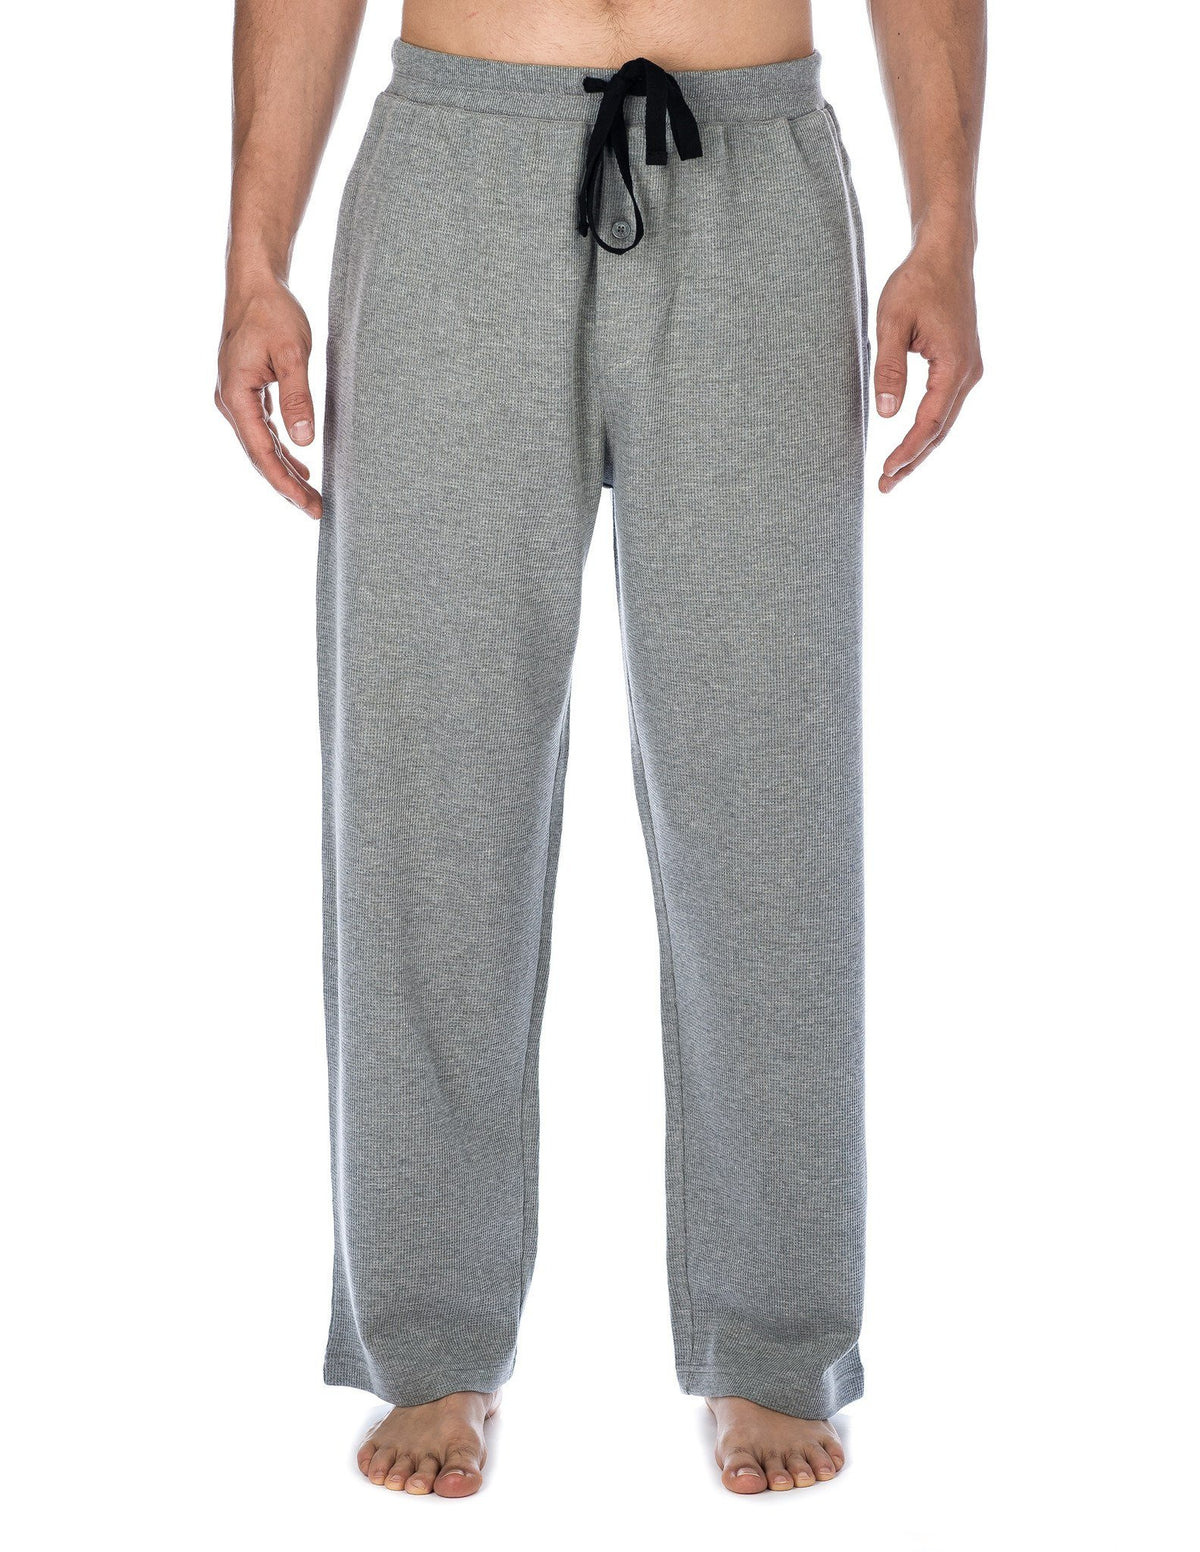 Men's Waffle Knit Thermal Lounge Pant - Heather Grey